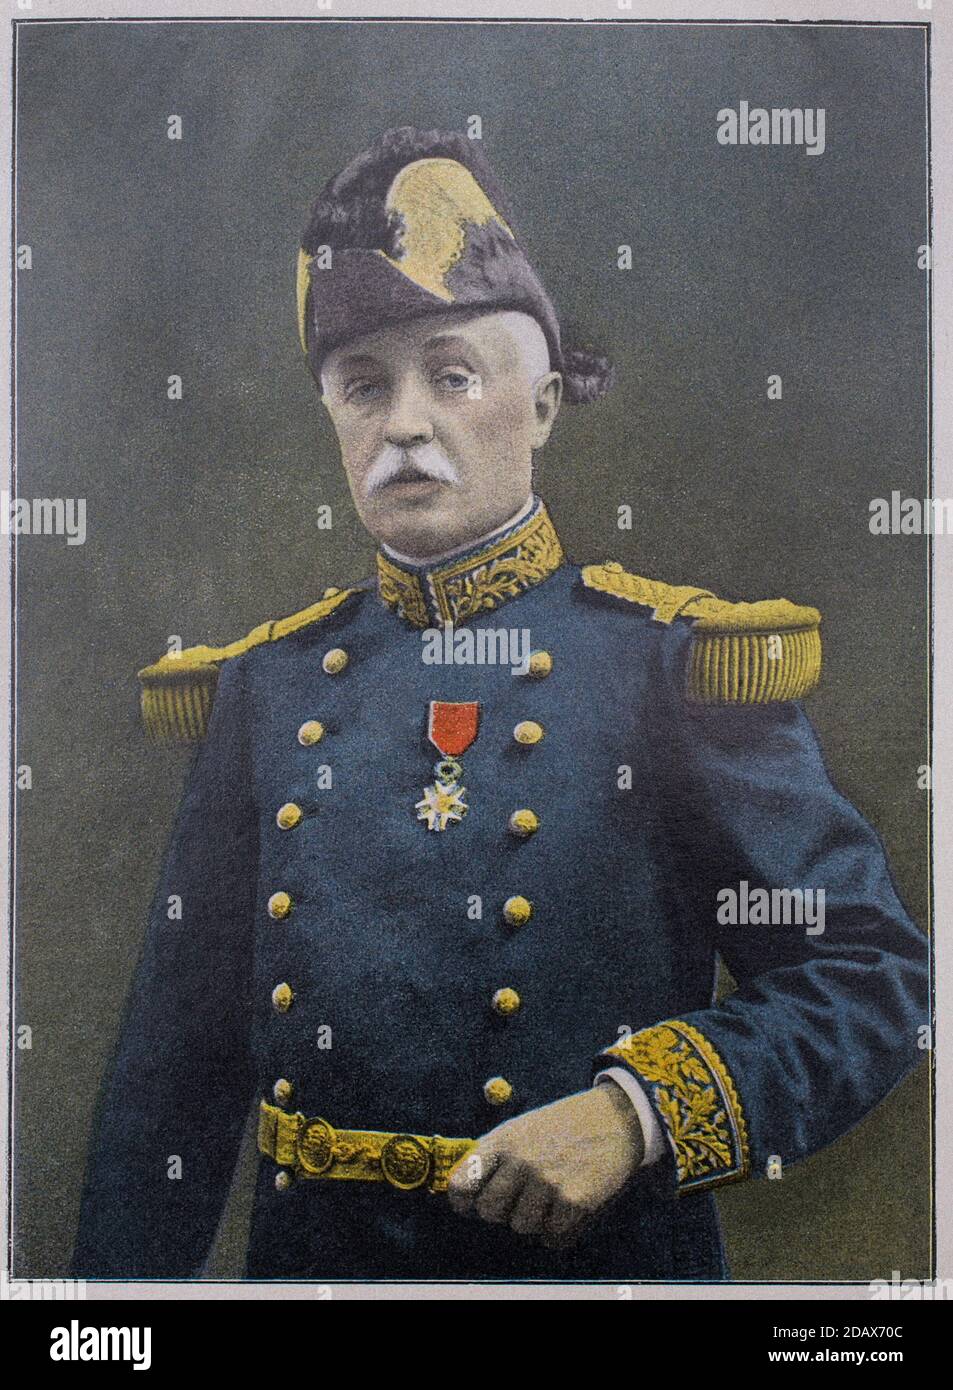 Retro photo of portrait of general Fayolle. Marie Emile Fayolle (1852 – 1928) was a French general during World War I and a diplomat, elevated to the Stock Photo